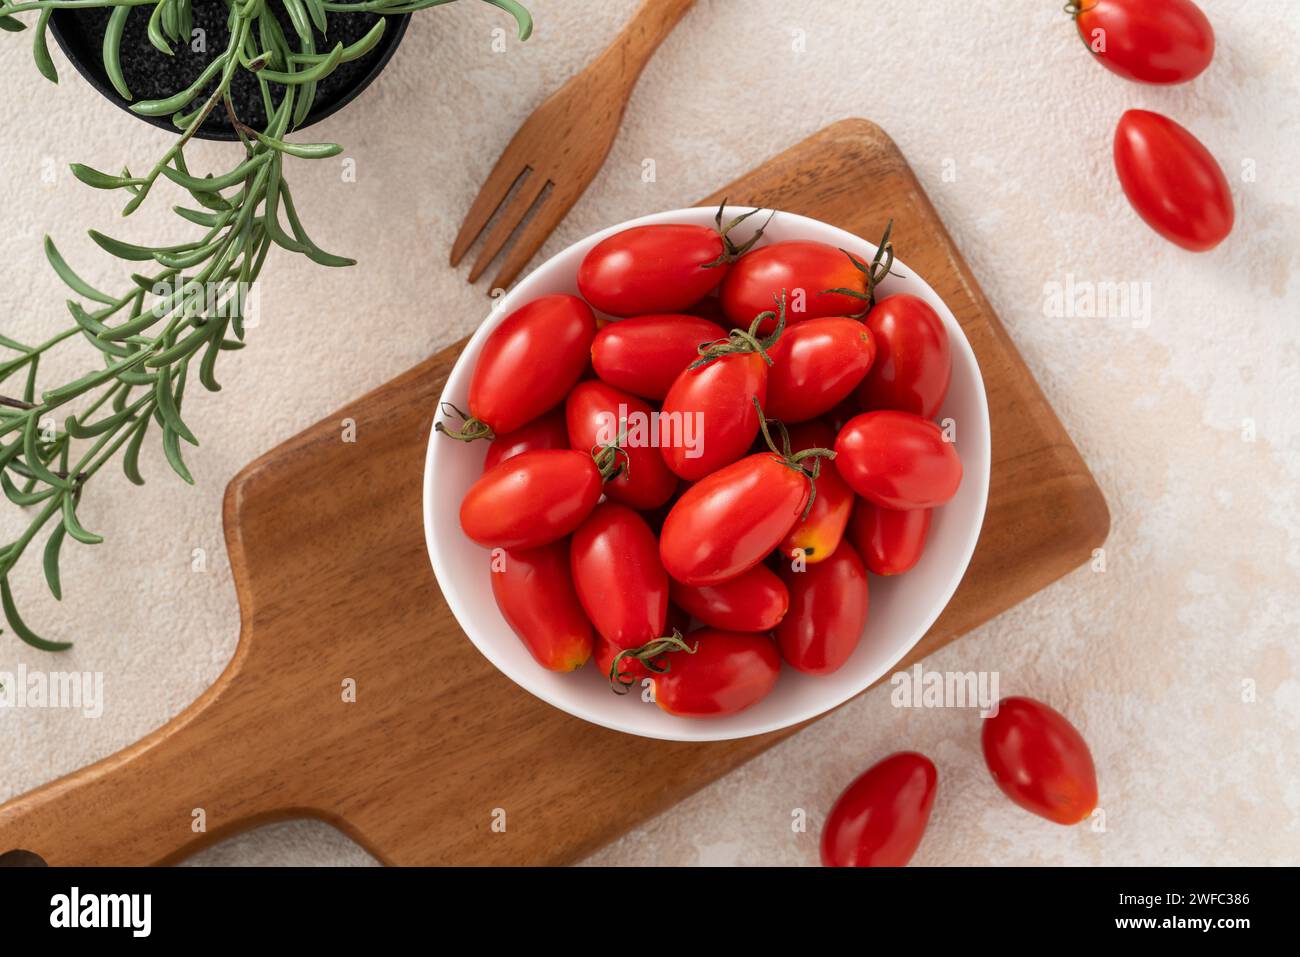 Top view of fresh cherry tomatoes over white table background Stock Photo